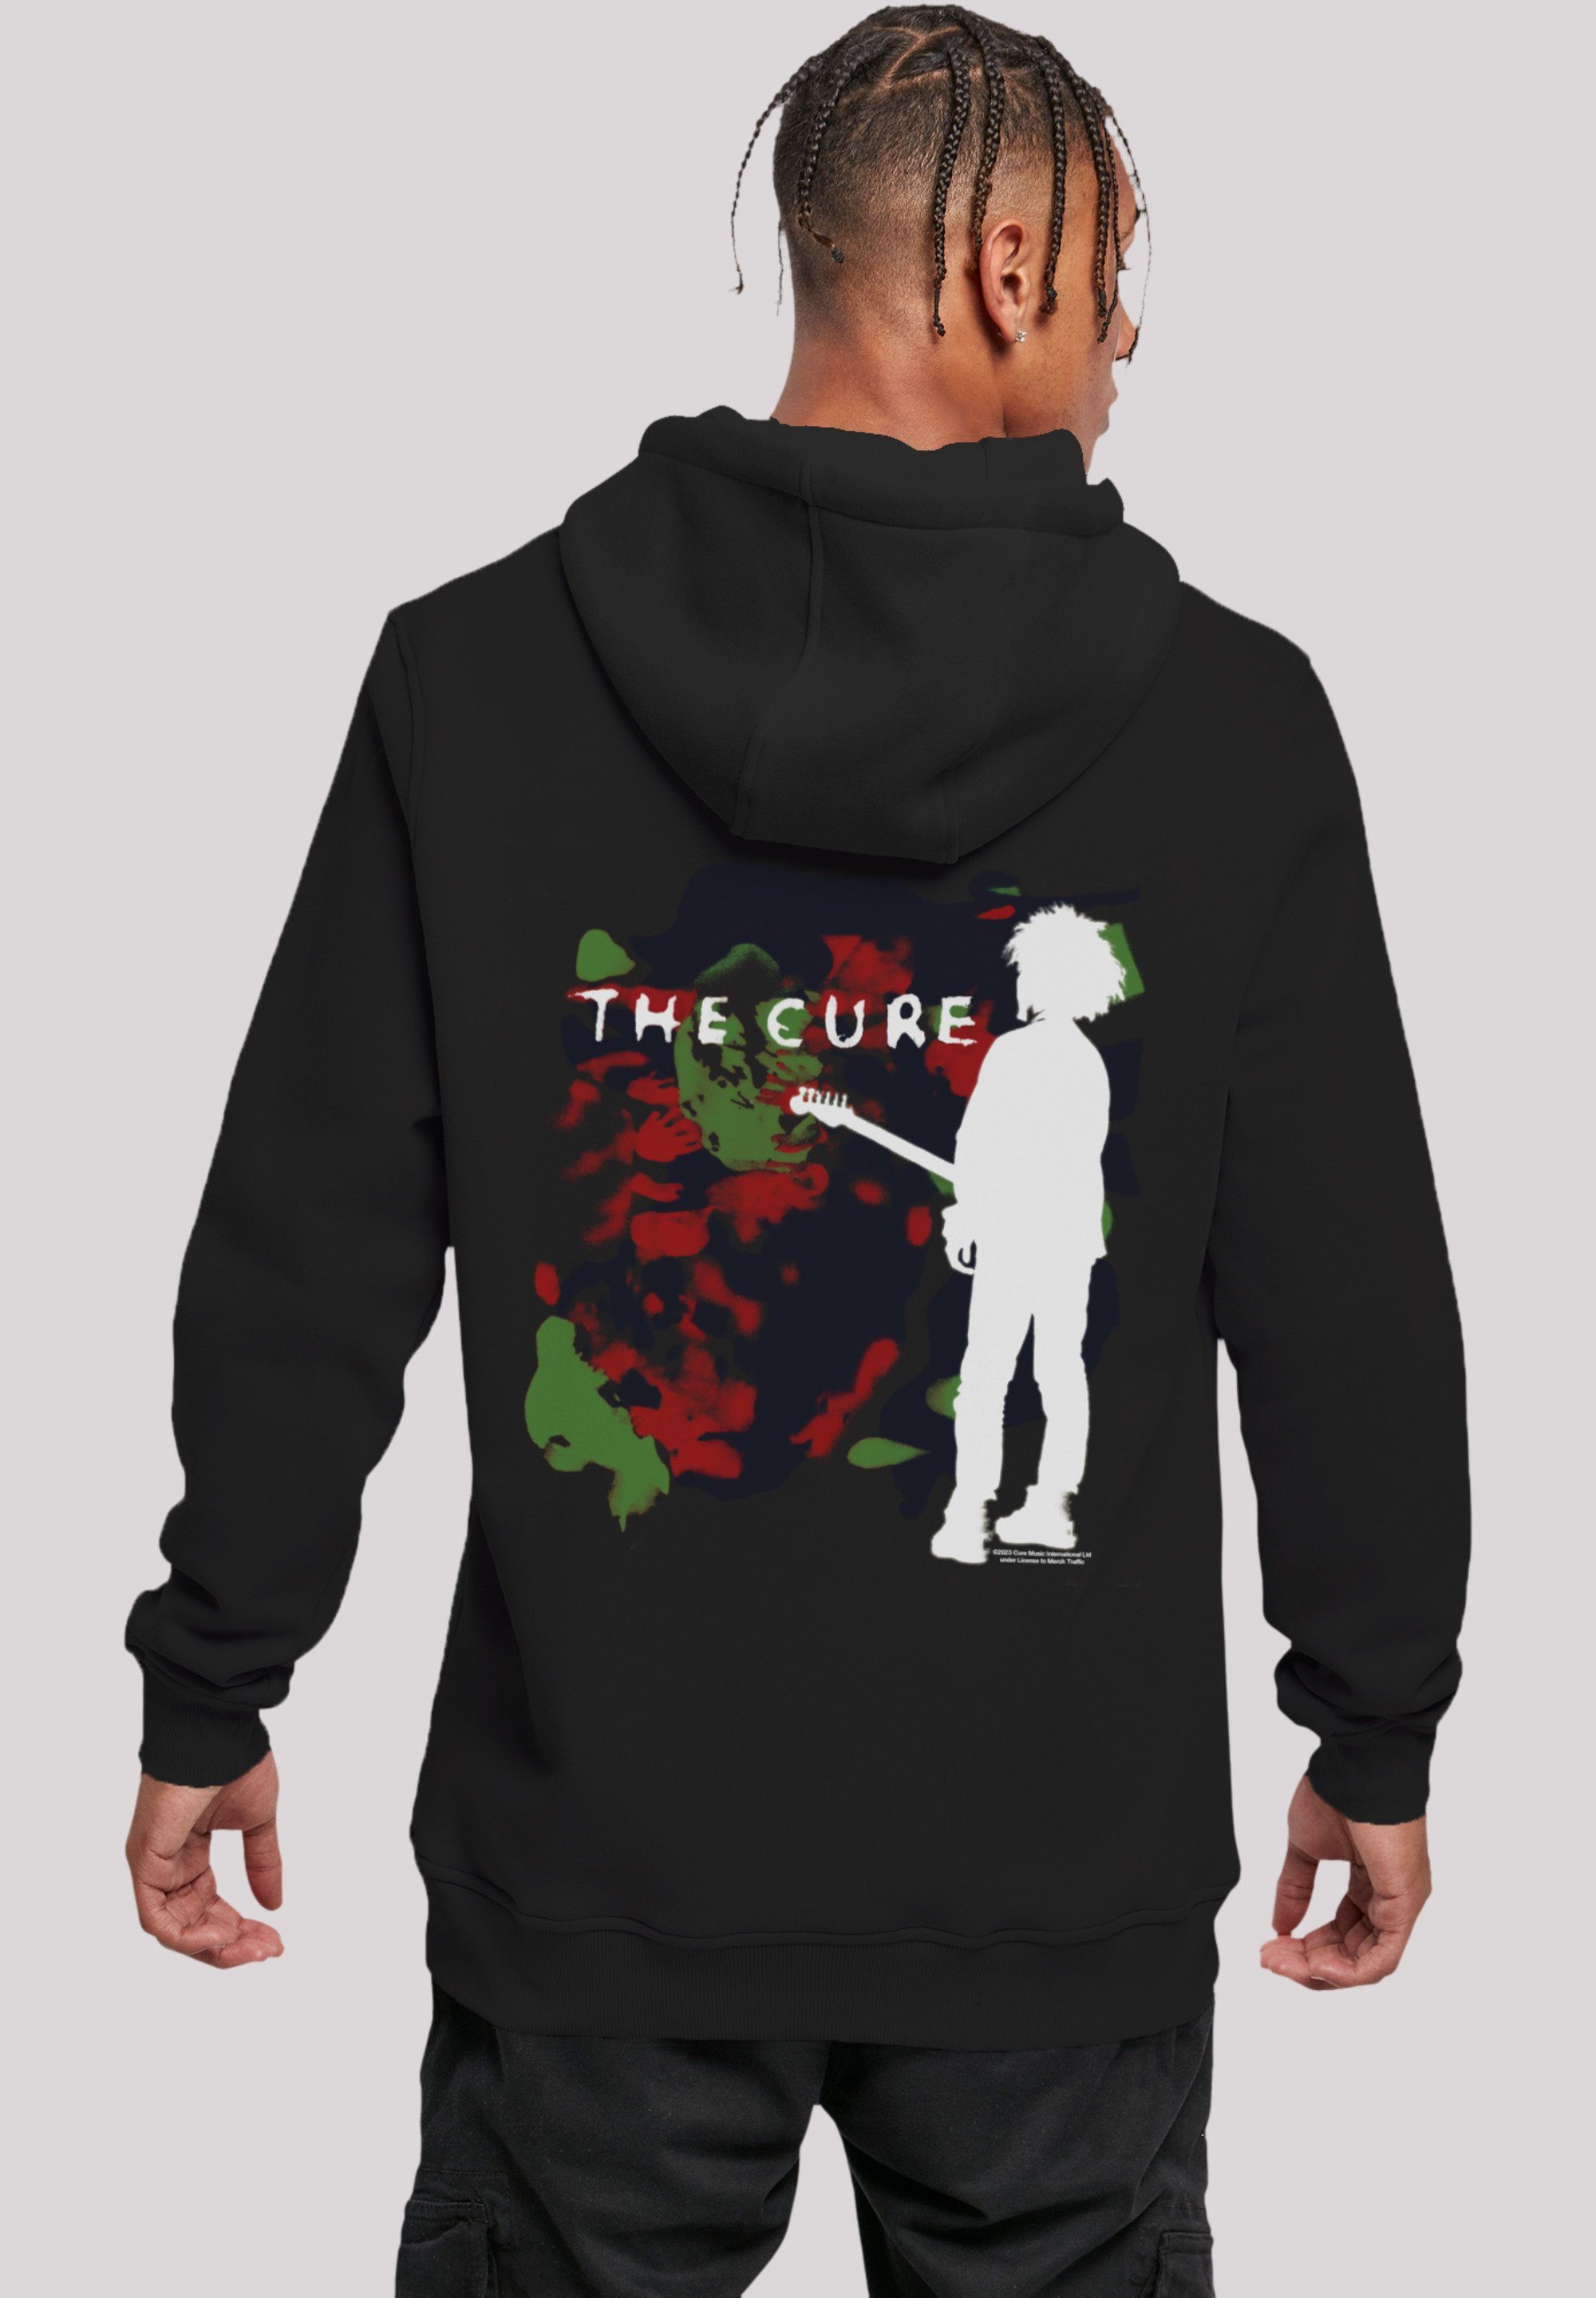 F4NT4STIC Hoodie The Cure Rock Music Band Boys Don't Cry Premium Qualität, Band, Logo schwarz